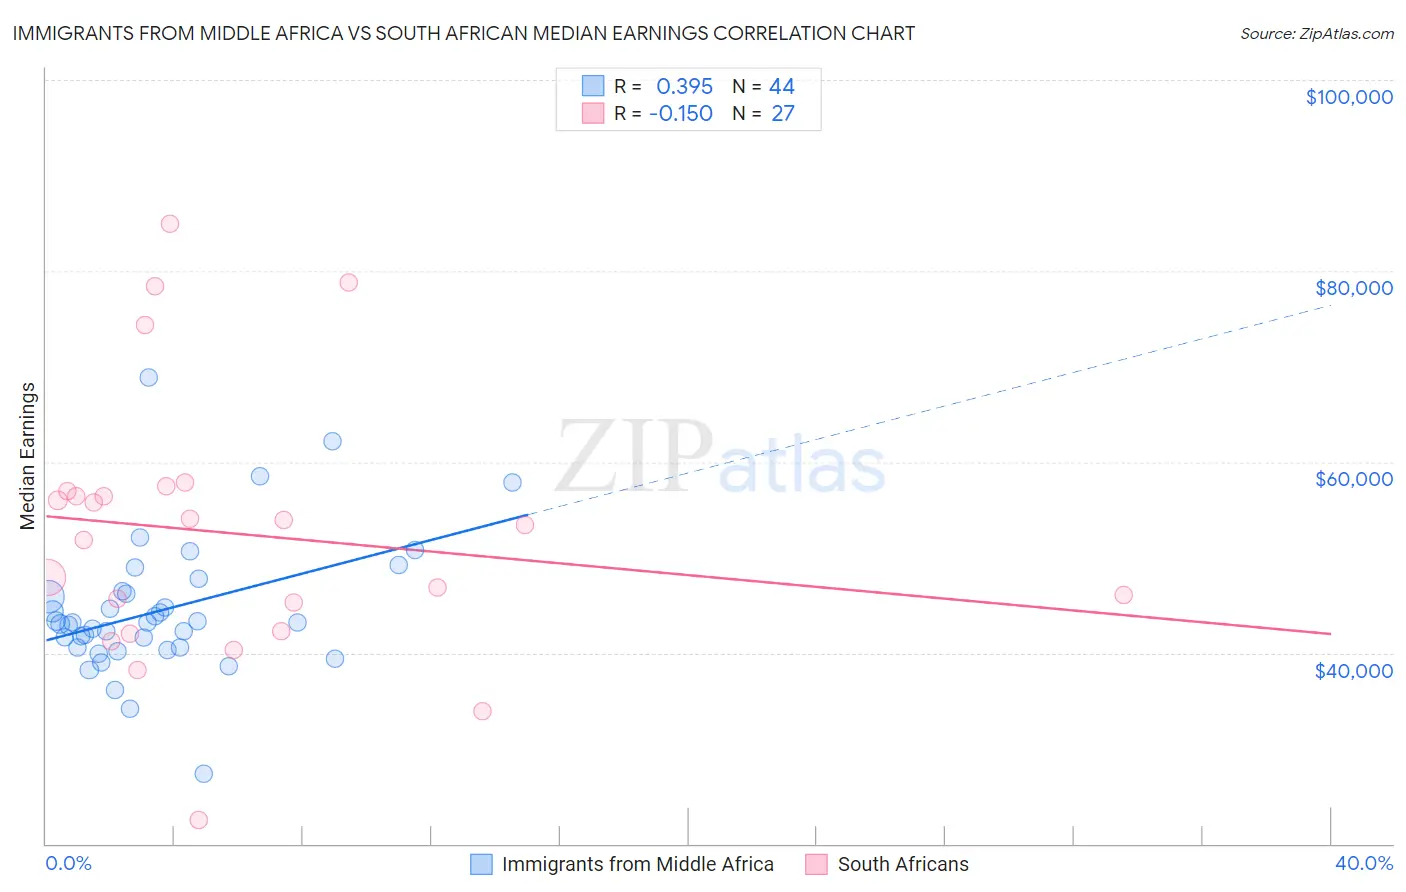 Immigrants from Middle Africa vs South African Median Earnings